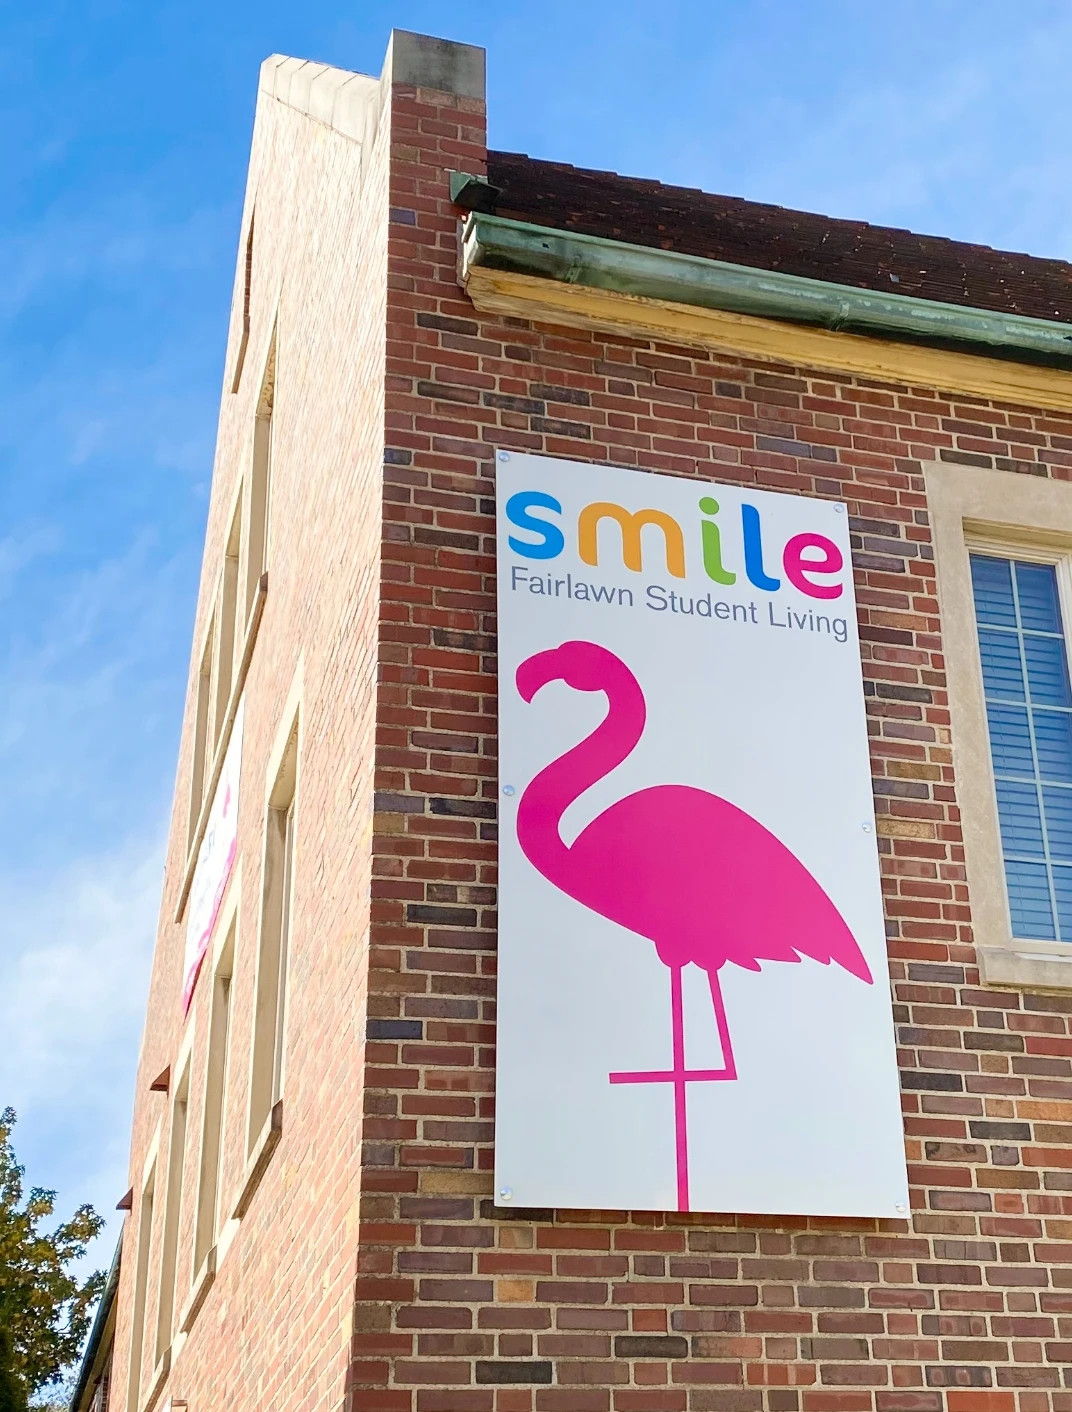 A pink flamingo sits on the side of a building.